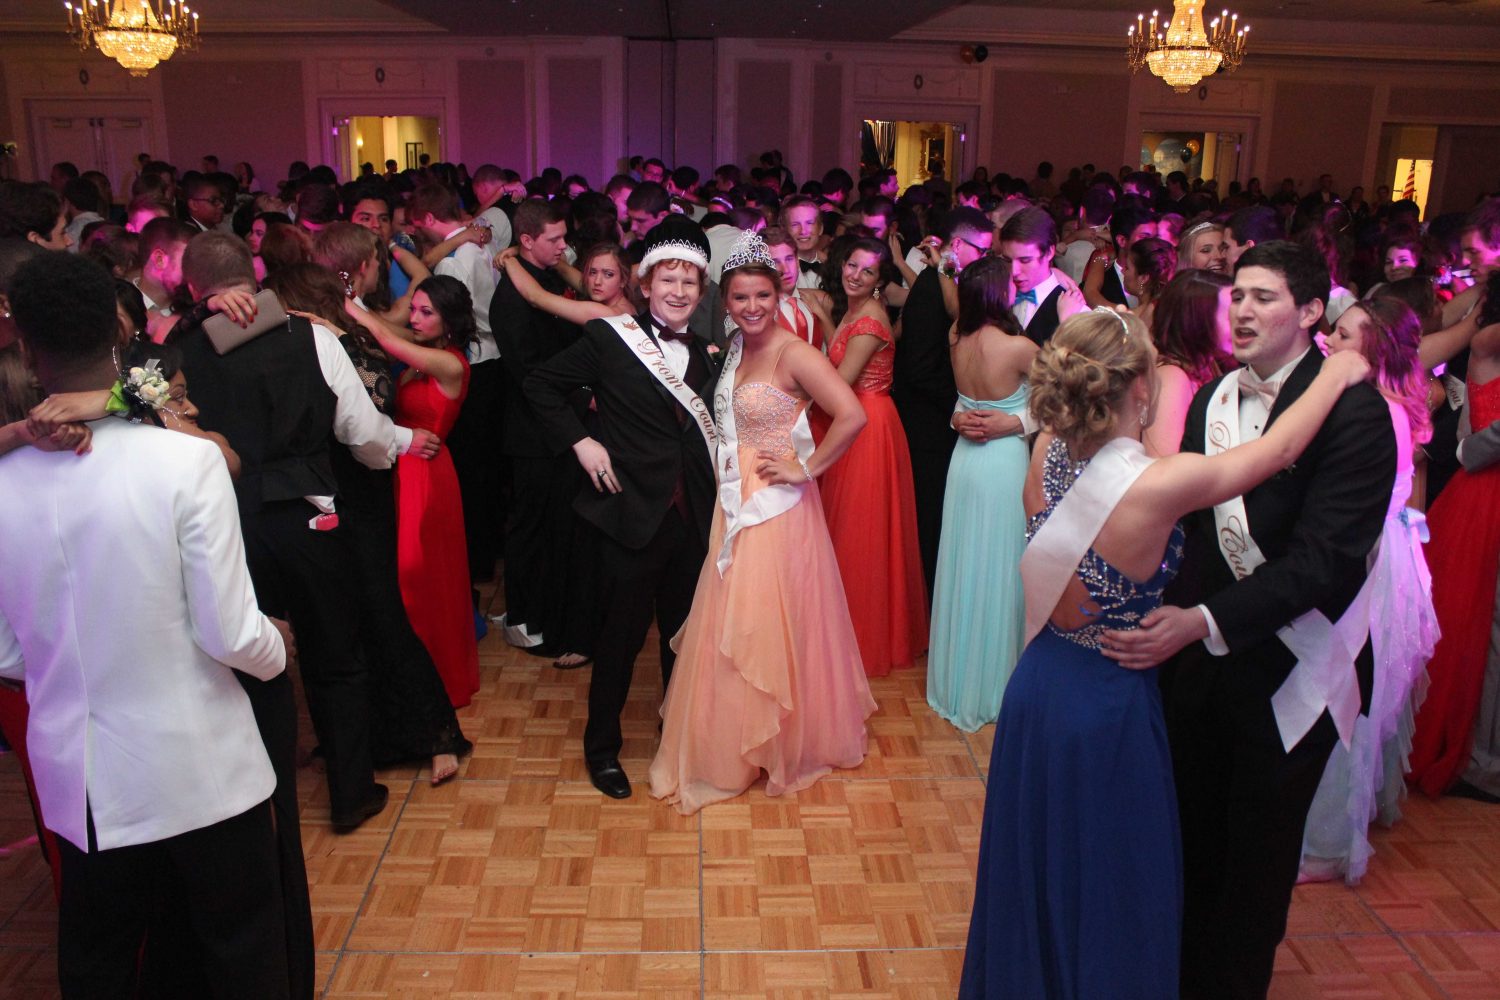 Opinion: Why is prom on a Friday?